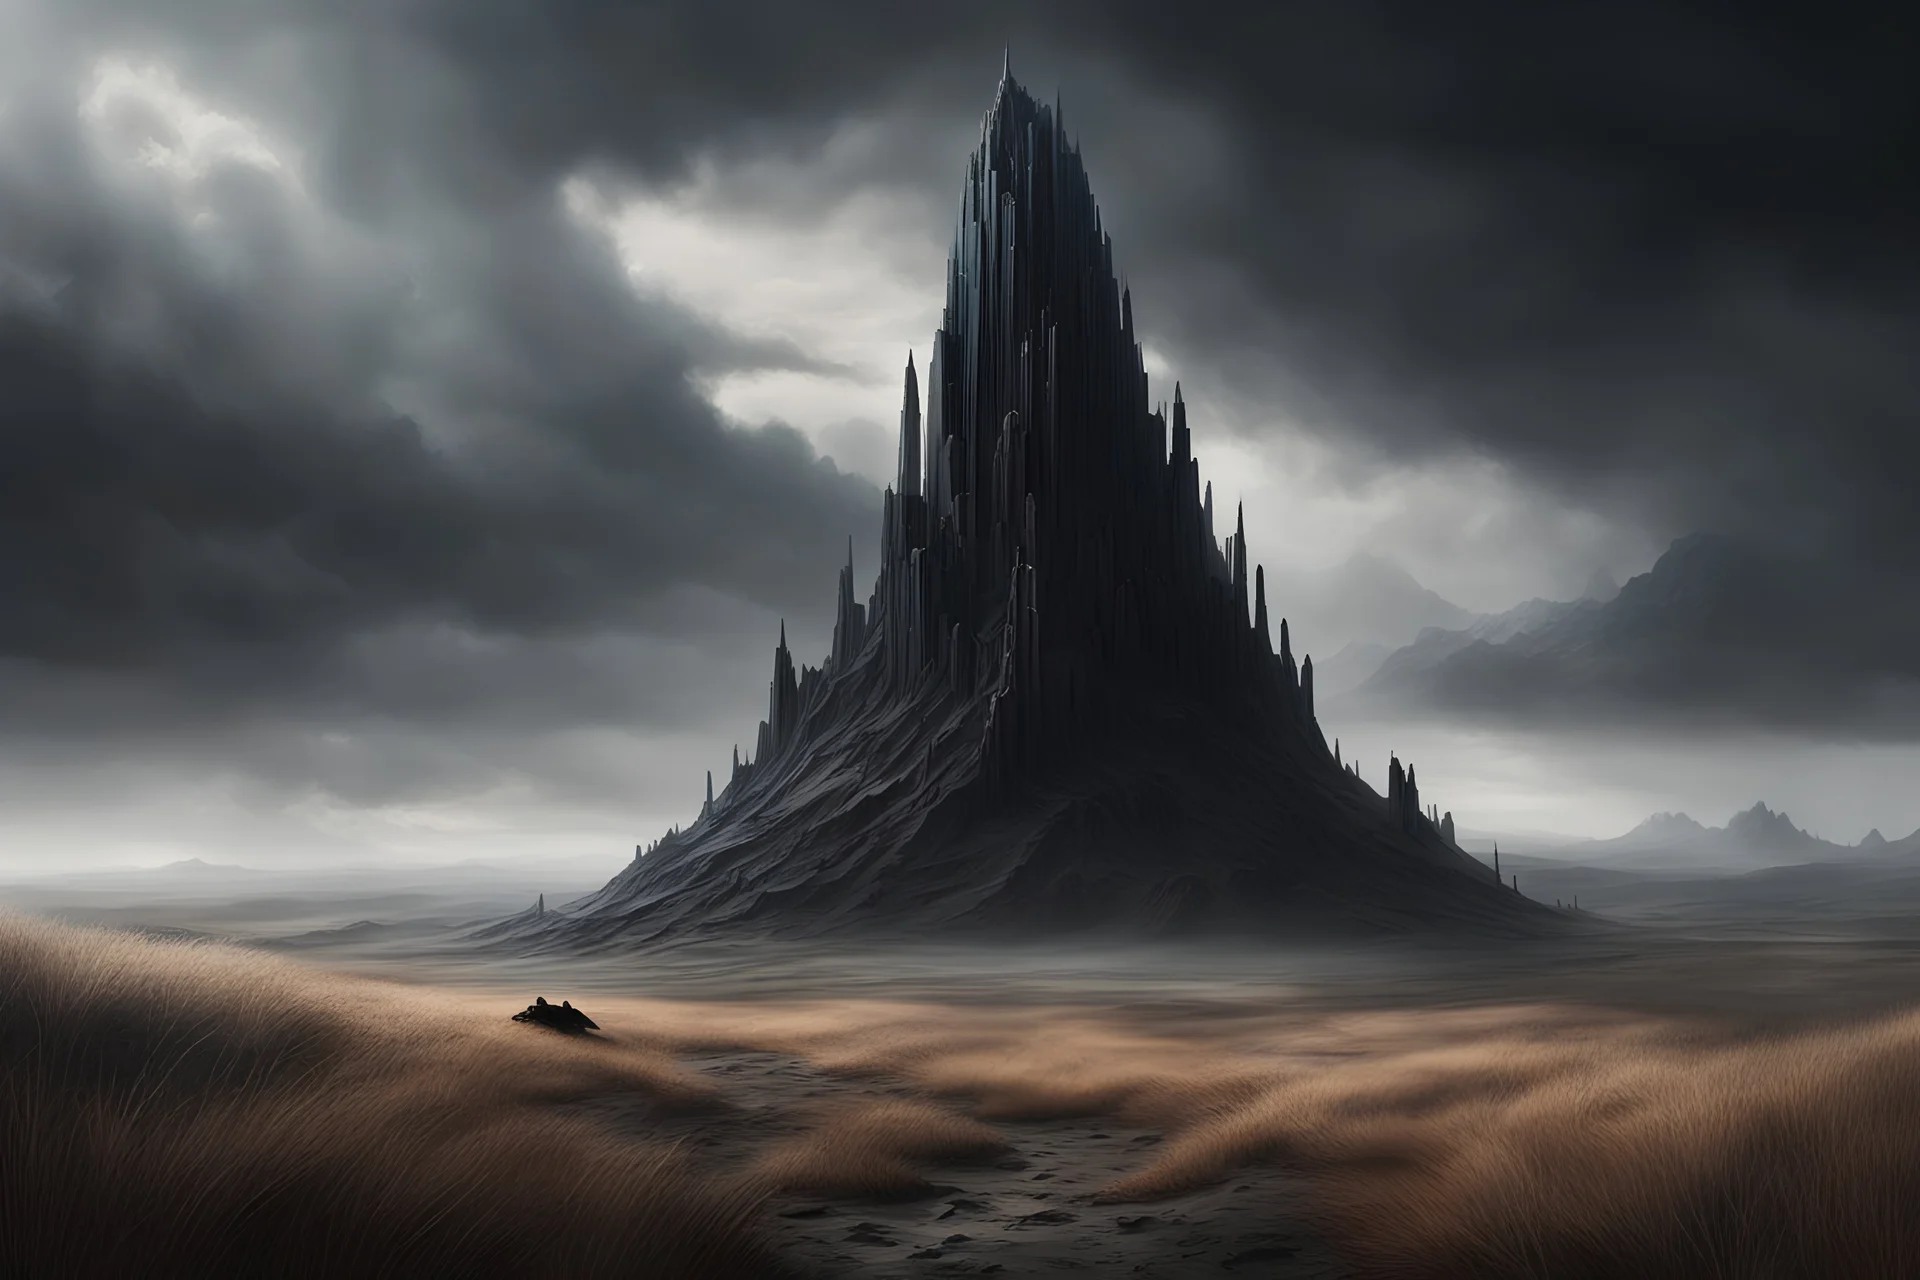 A hyper-realistic fantasy scene depicts a massive obsidian tower standing tall on a large hill. The tower's peak vanishes into the clouds, while the surrounding land is covered with dried grass, creating a gloomy and dark atmosphere.